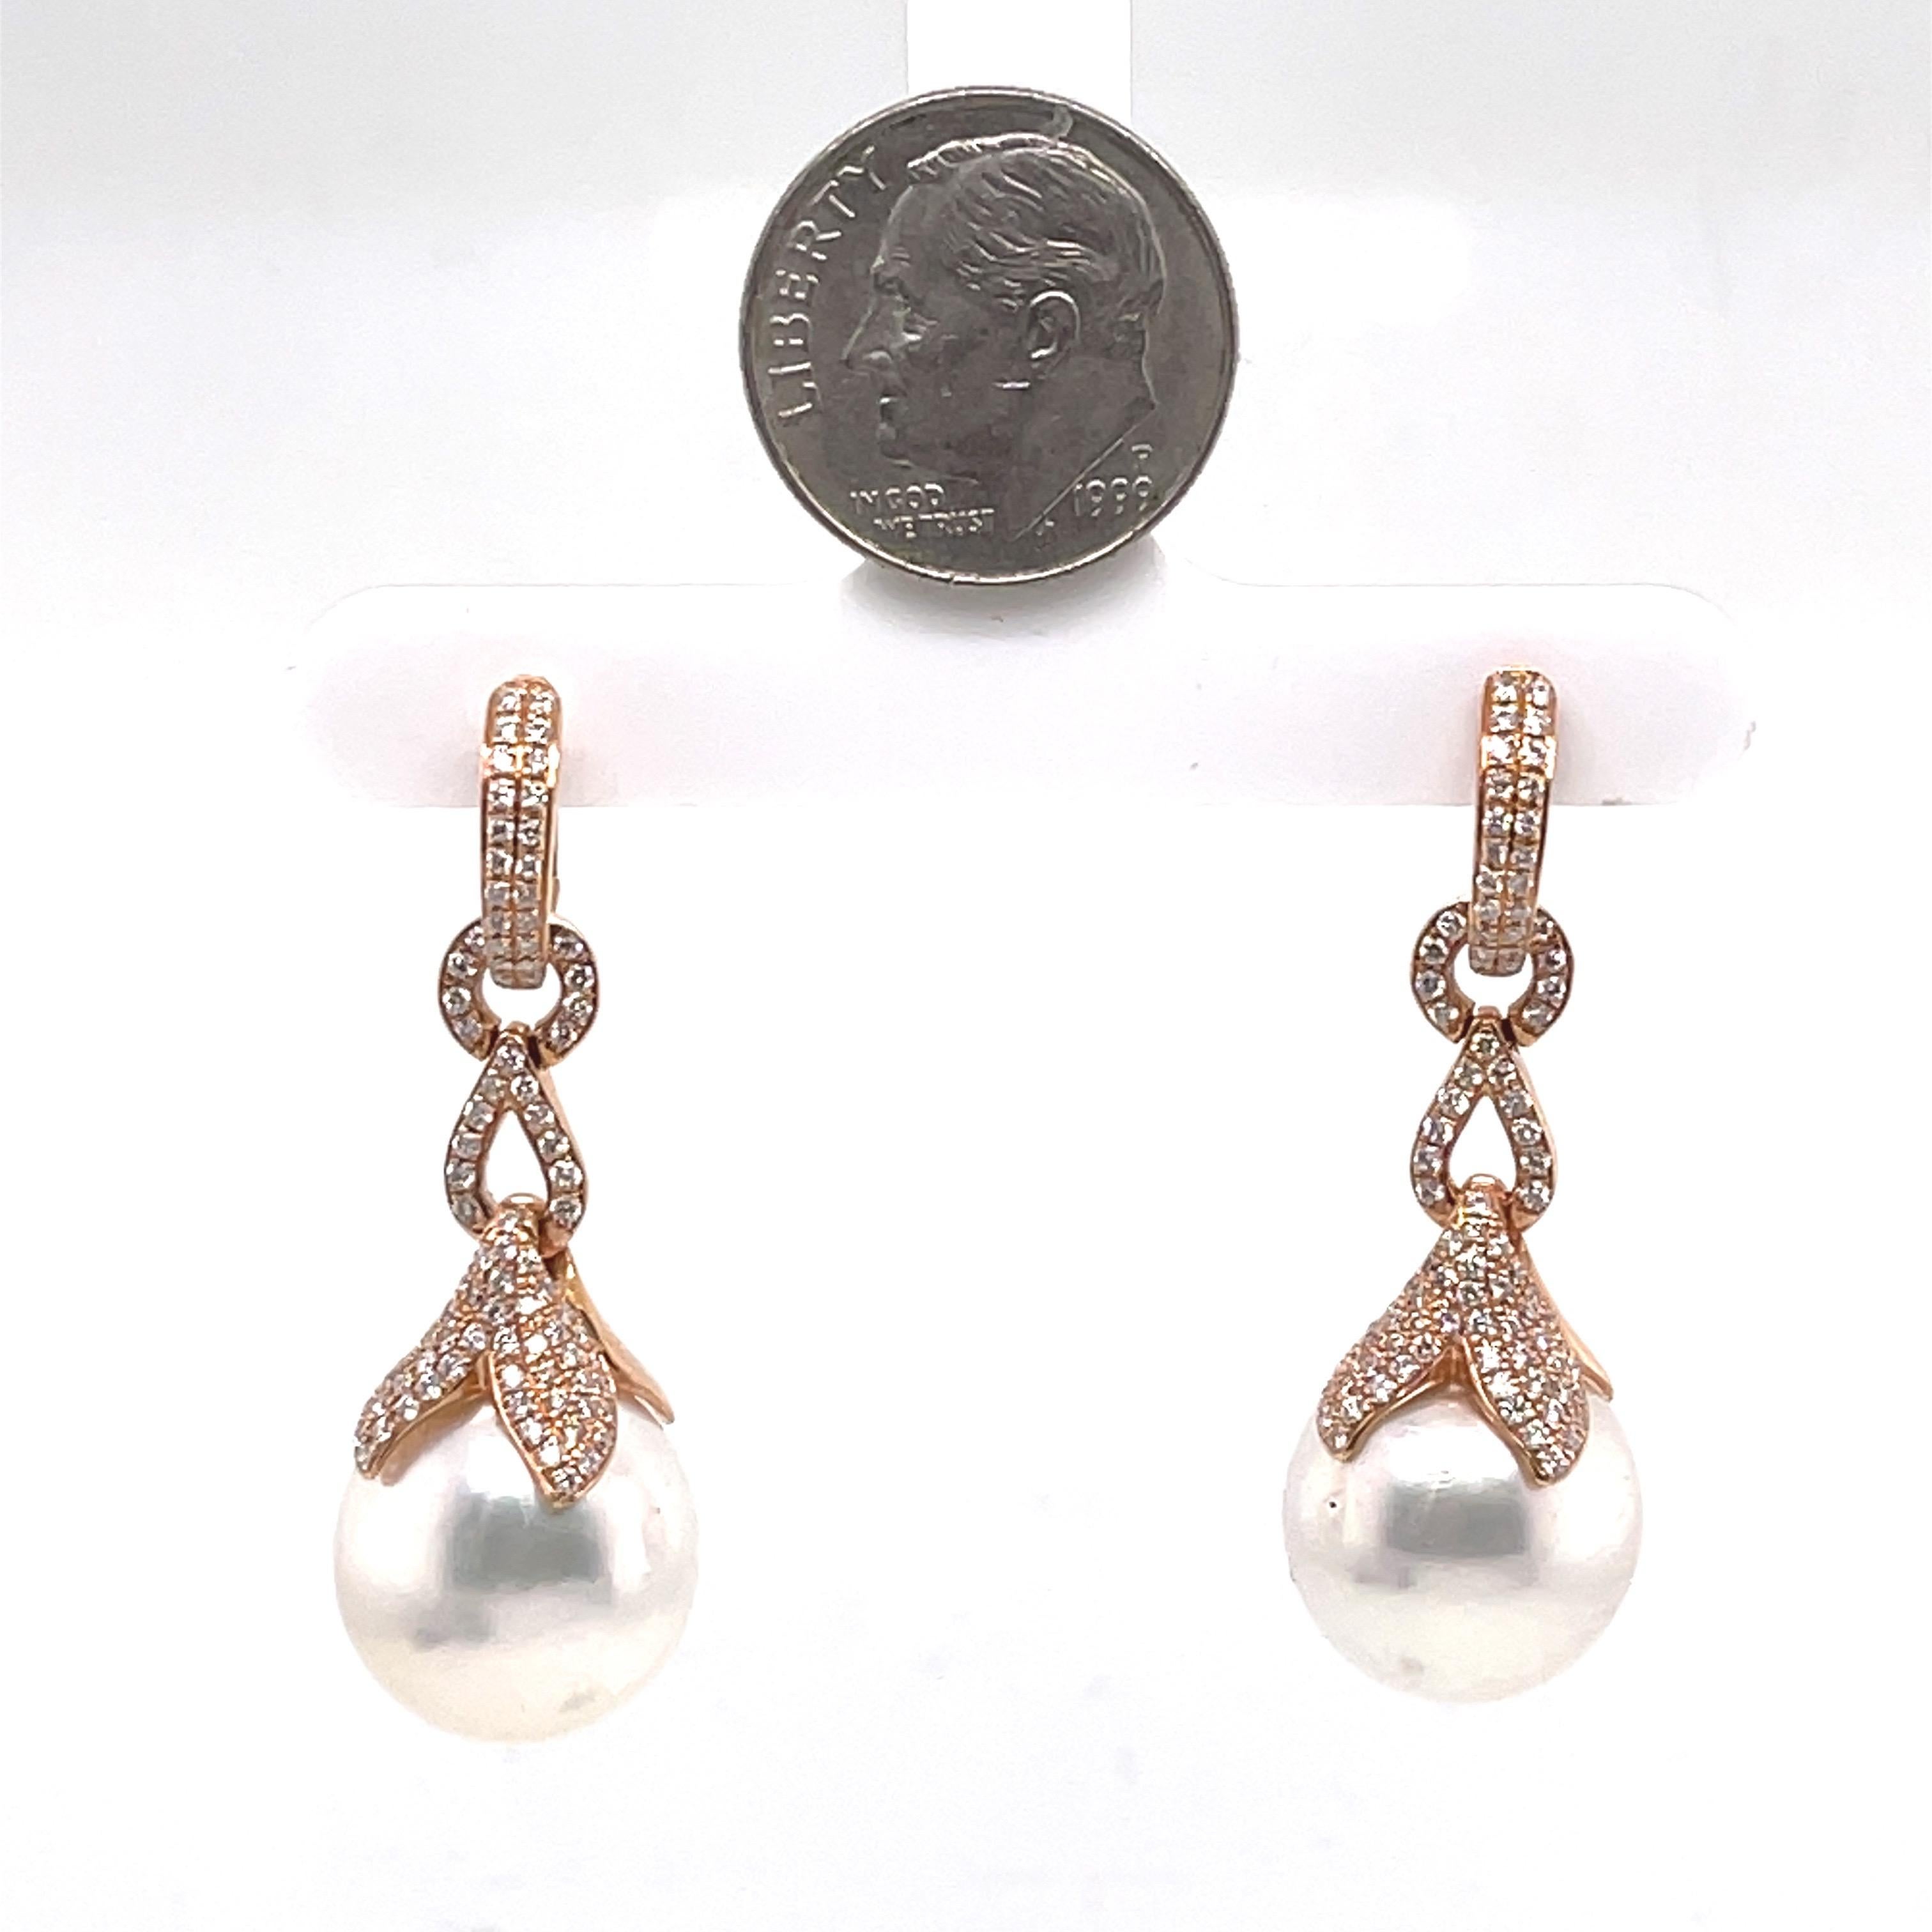 18K Rose Gold 8grams
81CT Diamonds
13-14mm Pearl
Latch Back
Earring is Detachable, can be worn as a drop earring or diamond hoops.